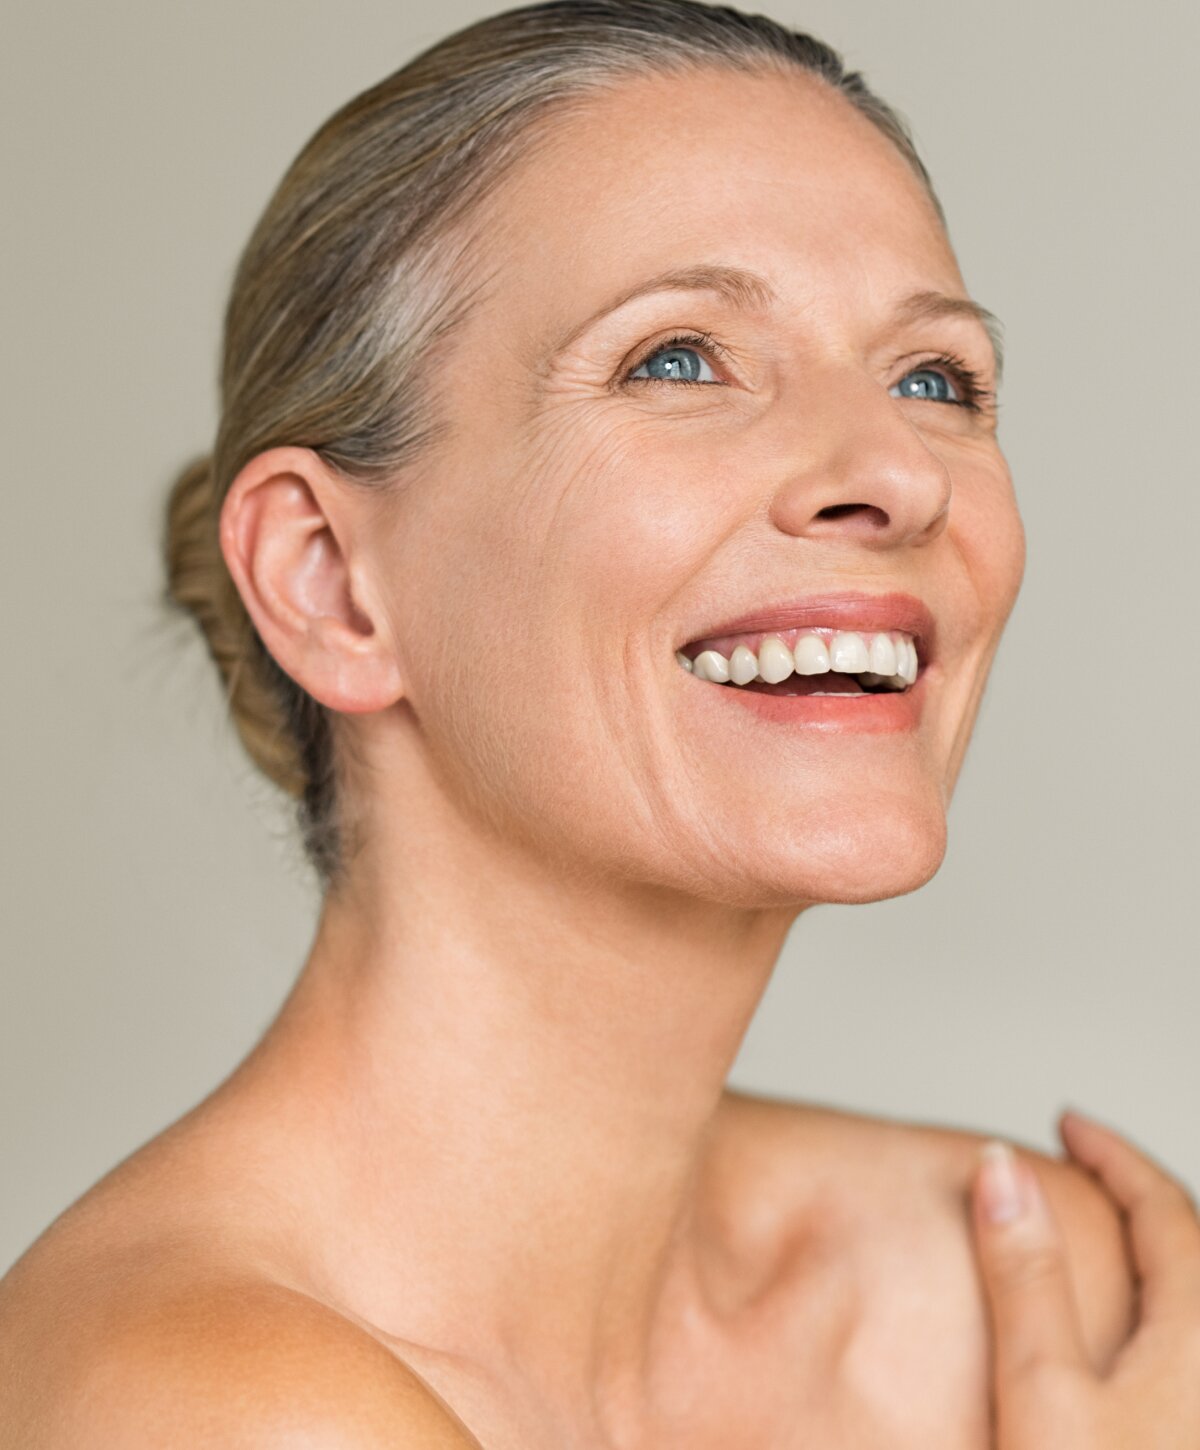 Miami neck lift model with brown hair